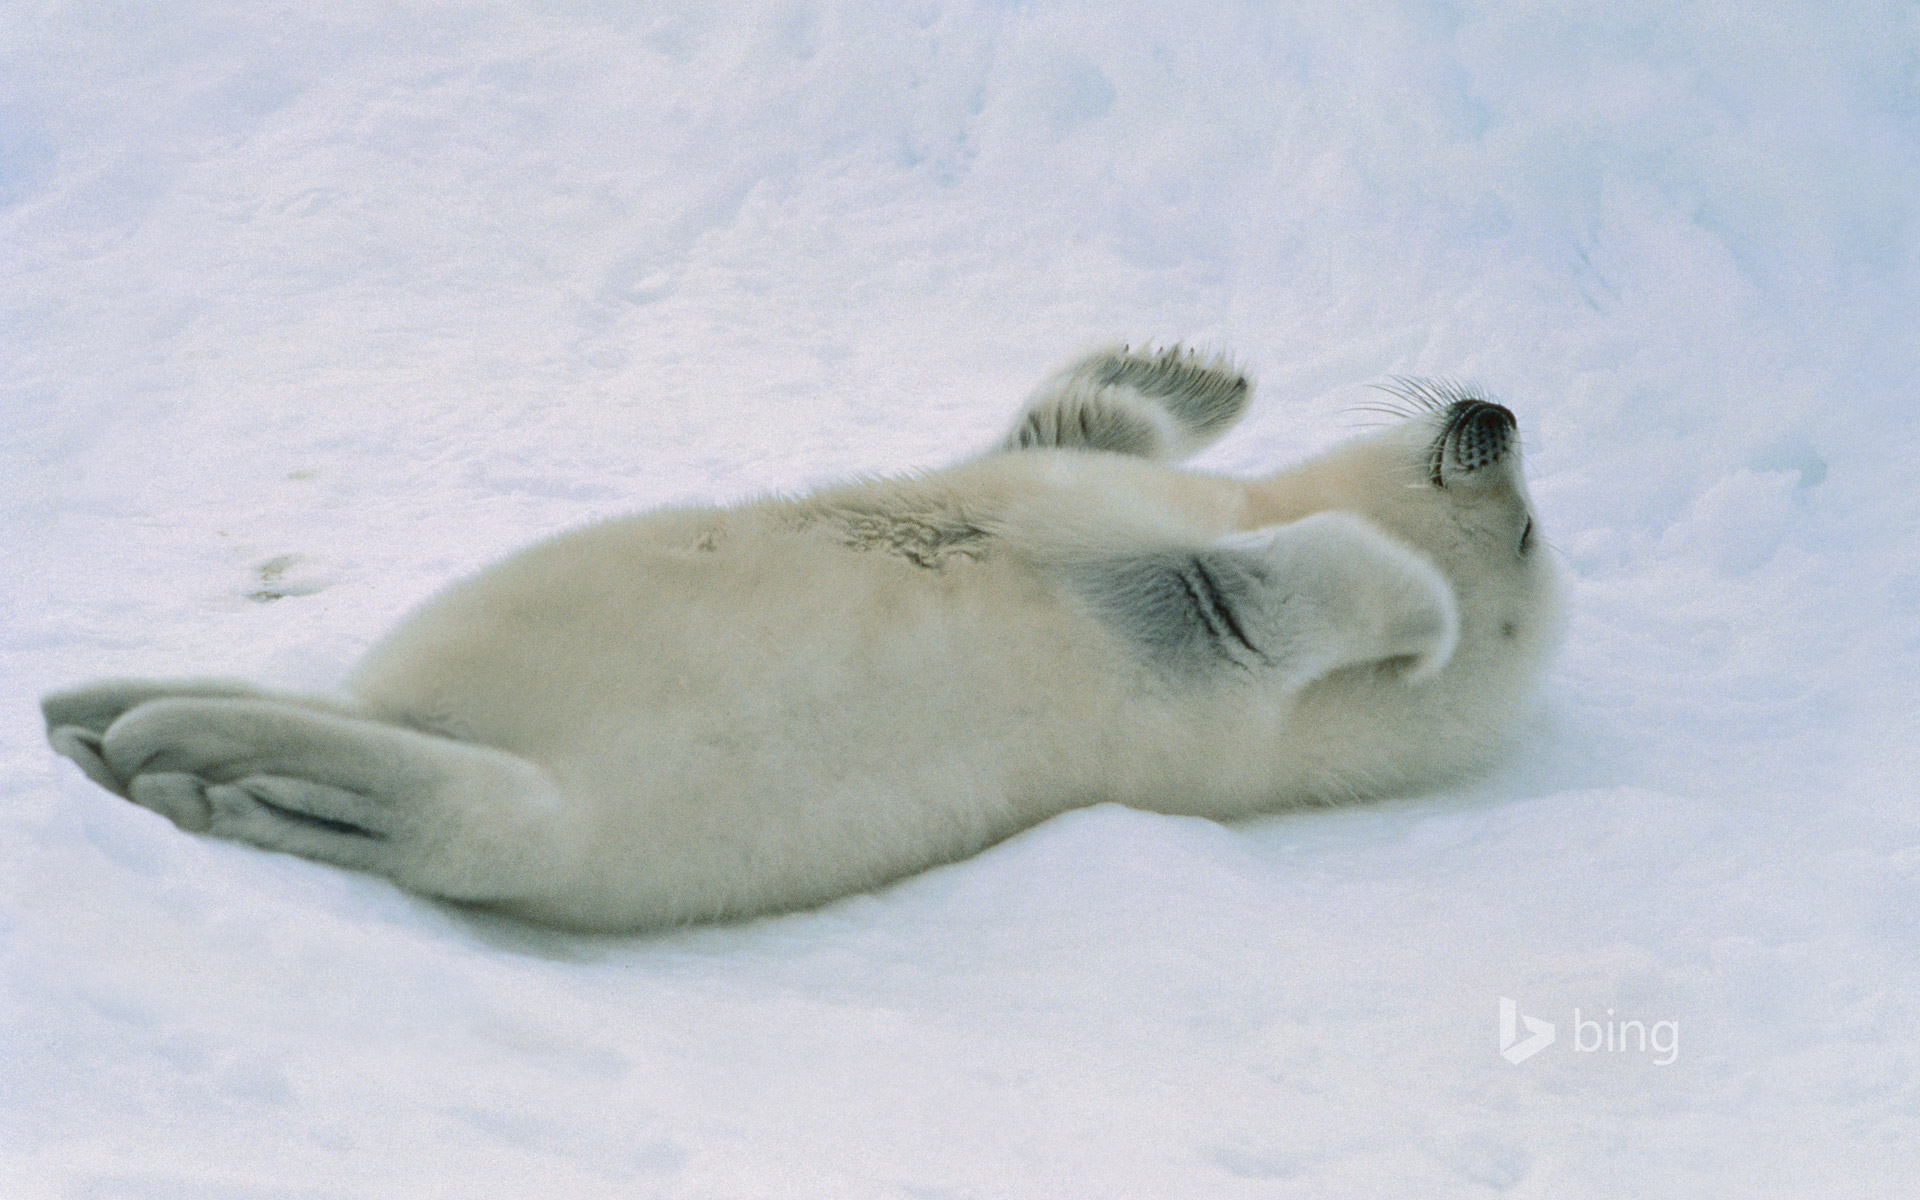 Harp seal pup at the Gulf of St. Lawrence, Canada